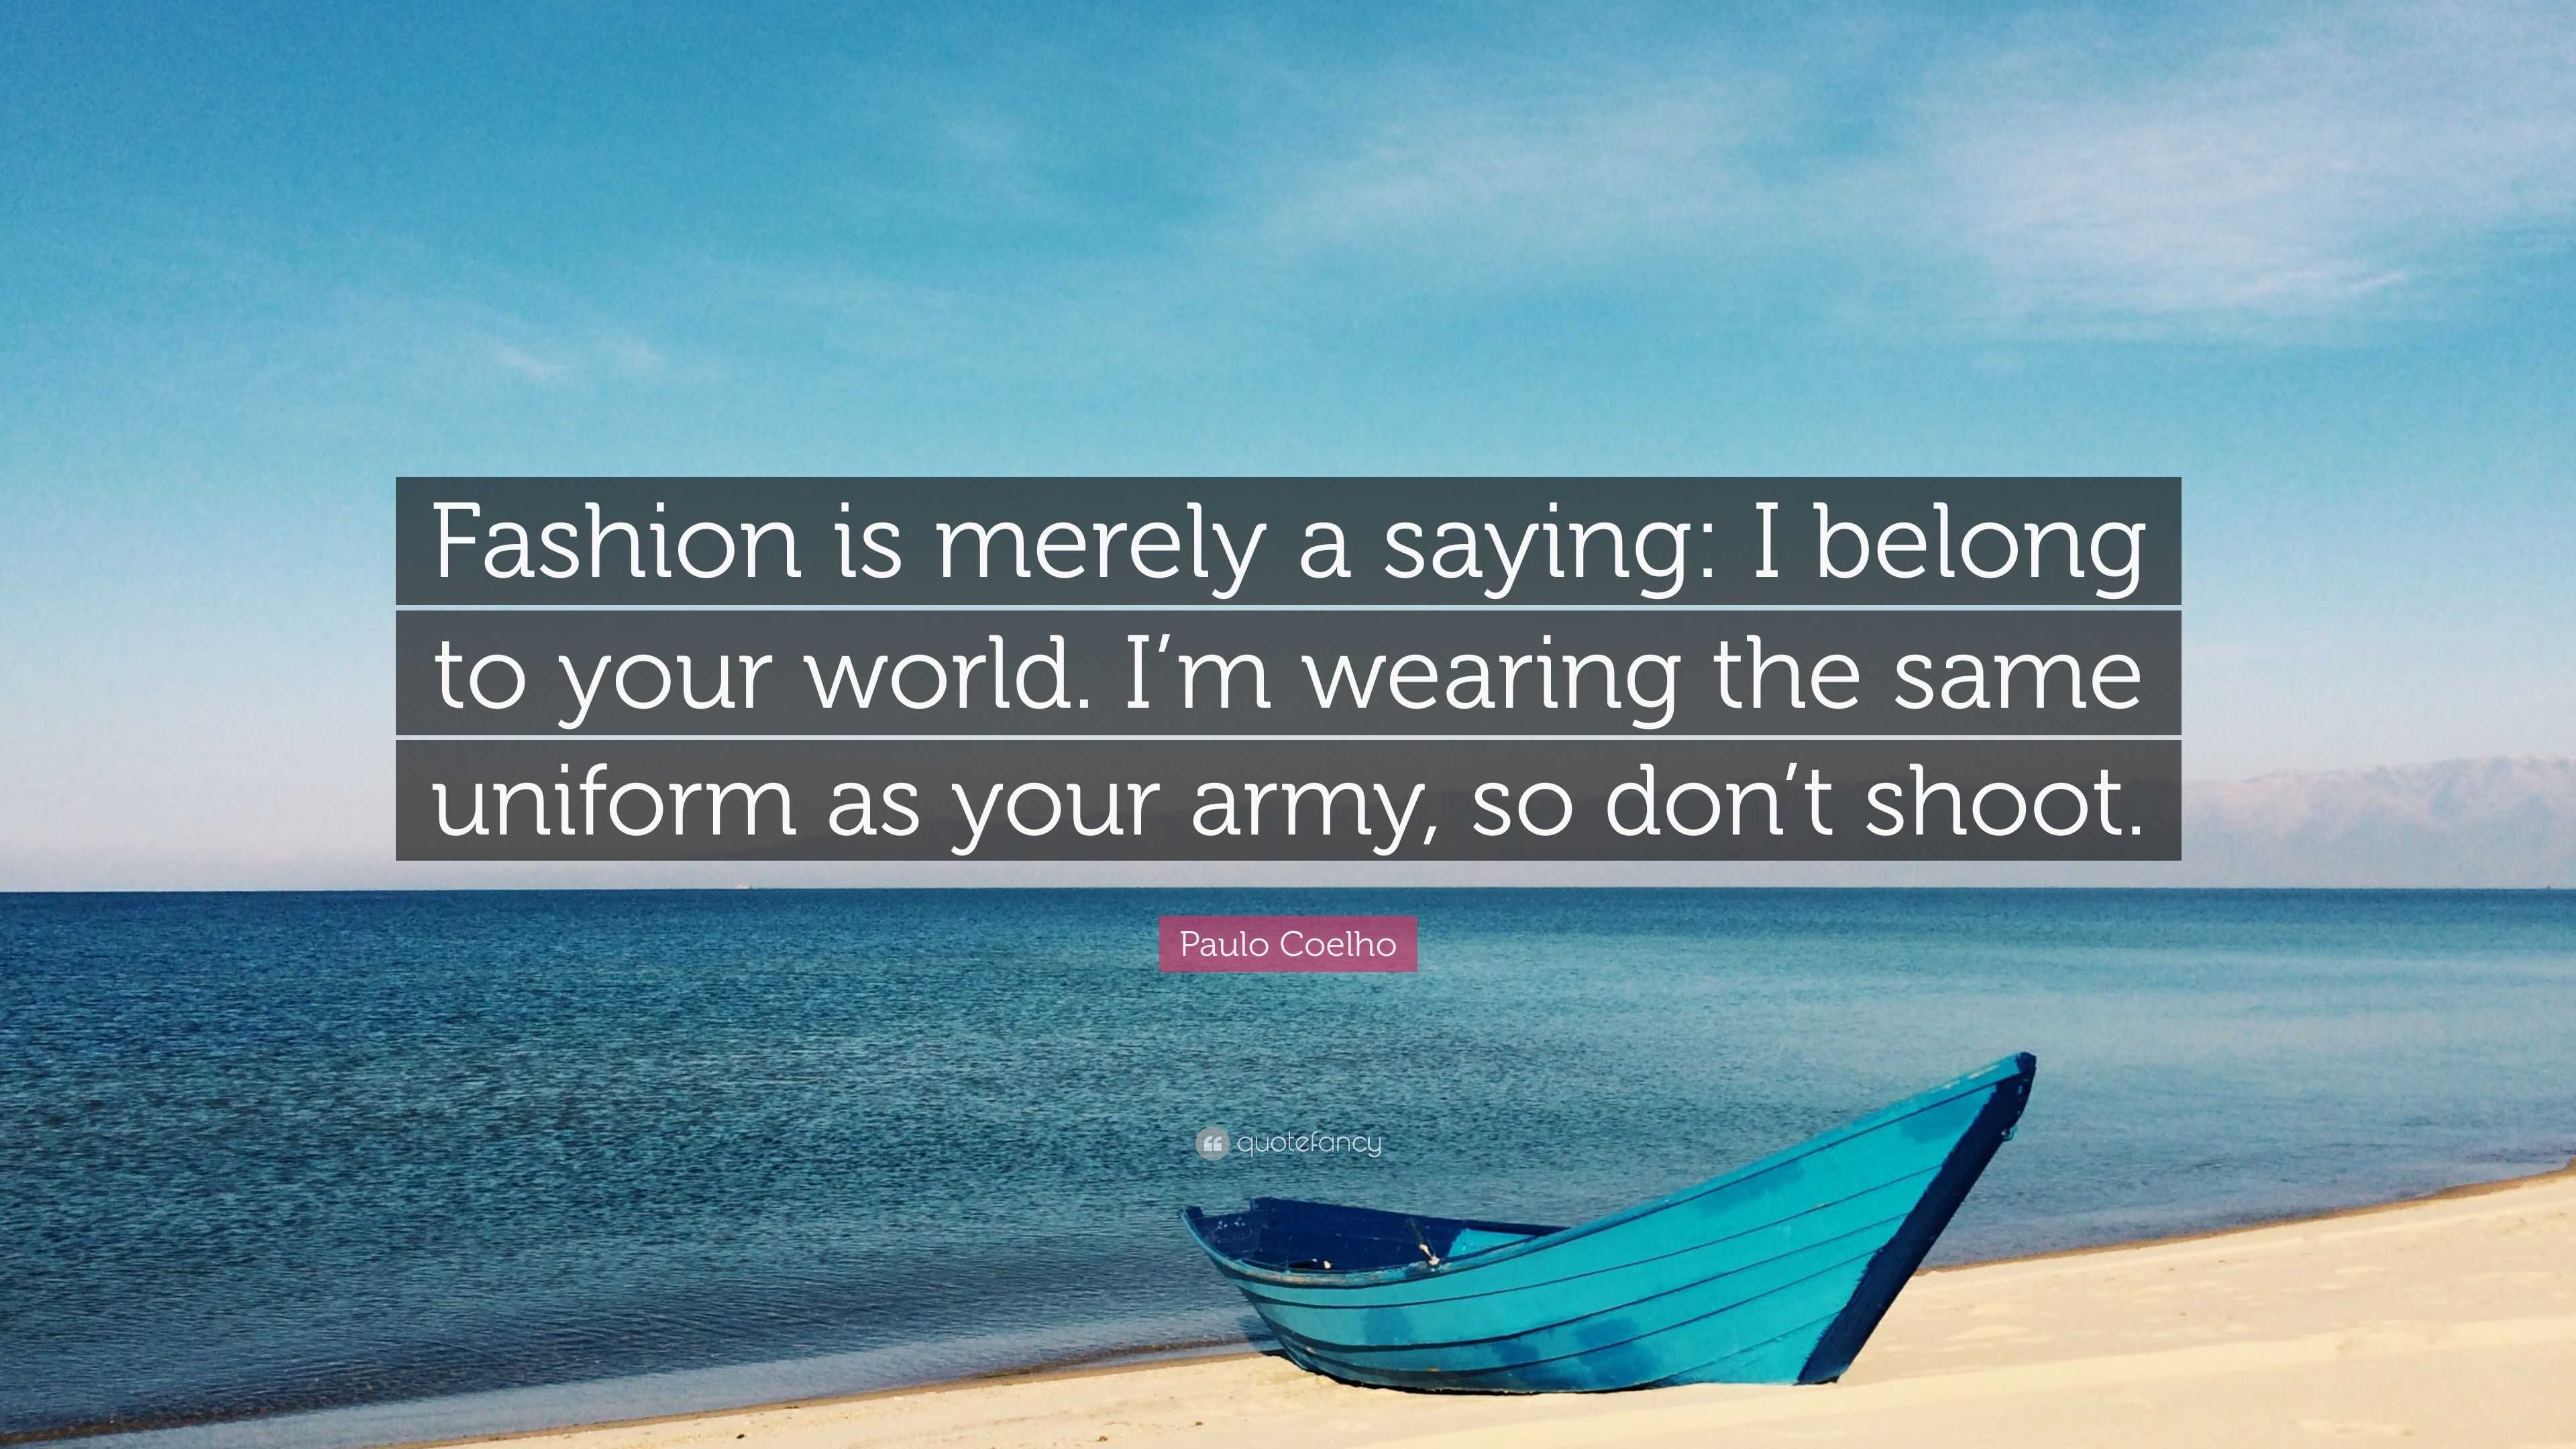 Your World of Fashion